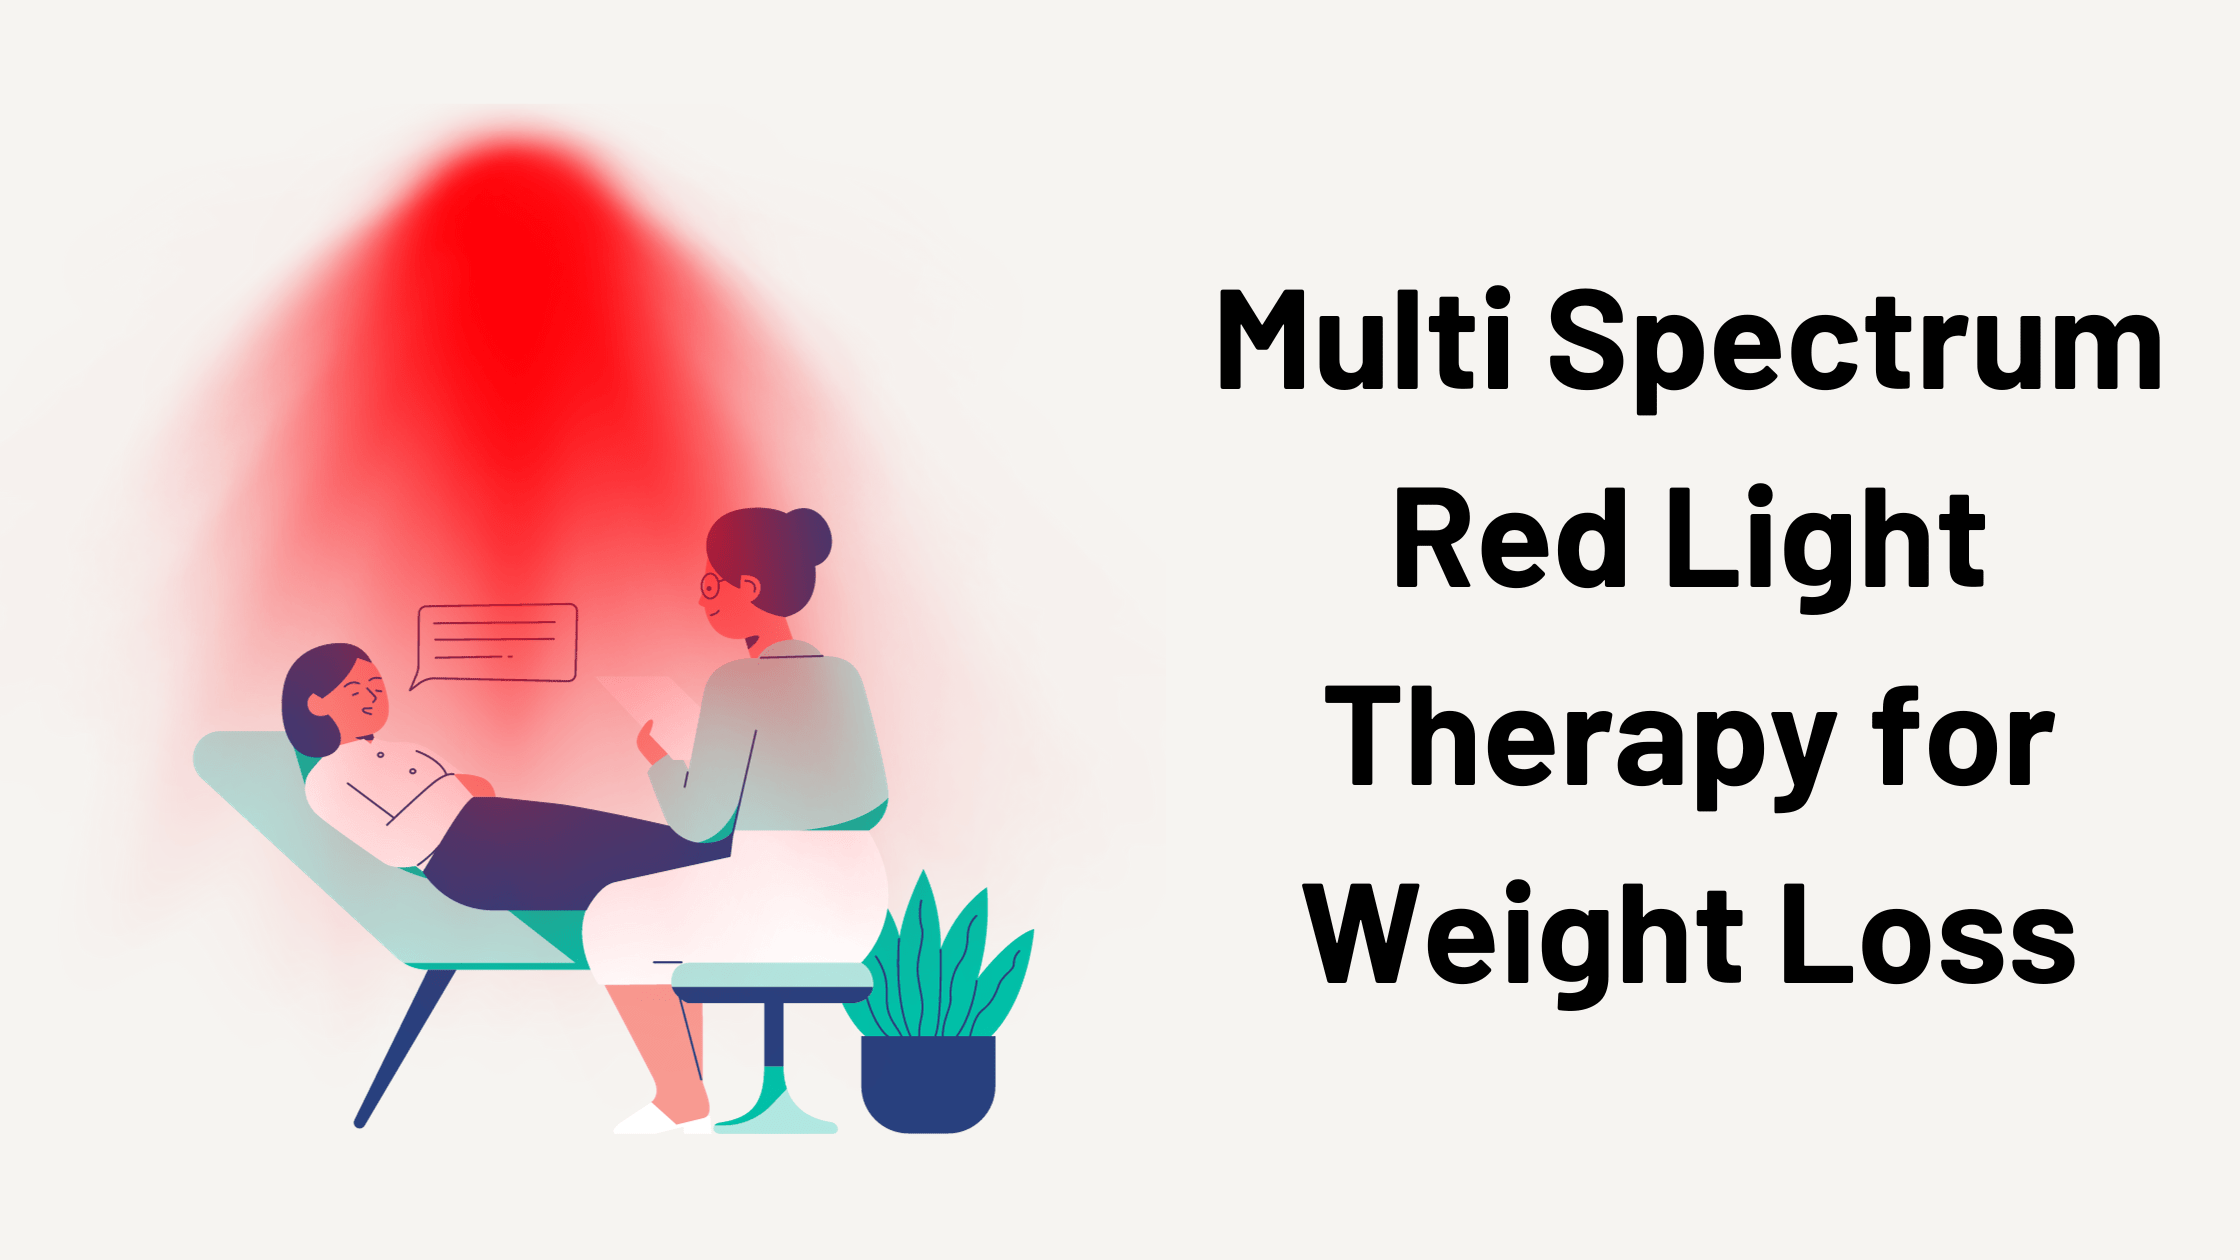 Multi Spectrum Red Light Therapy for Weight Loss